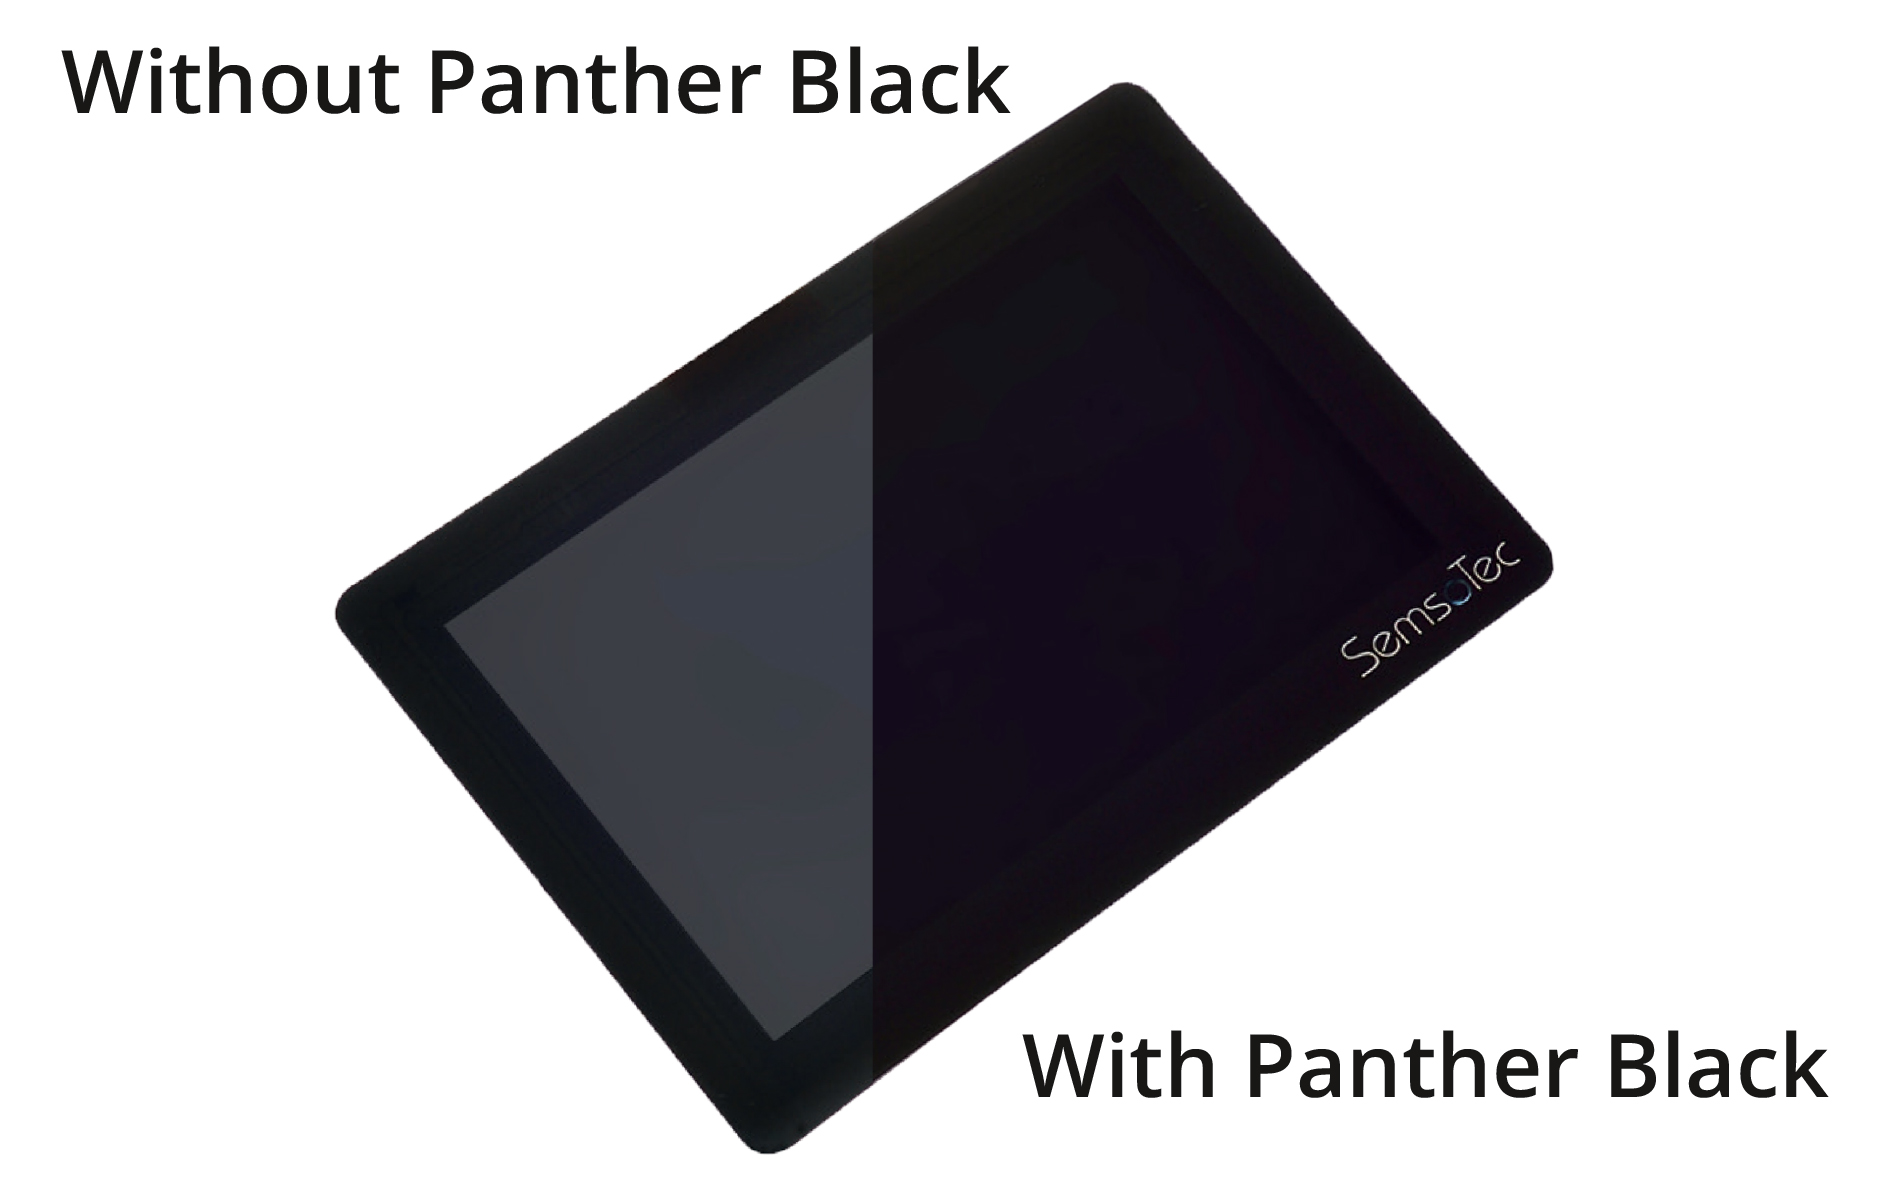 SemsoTec's Panther Black Technology ensures better readability in sunlight.